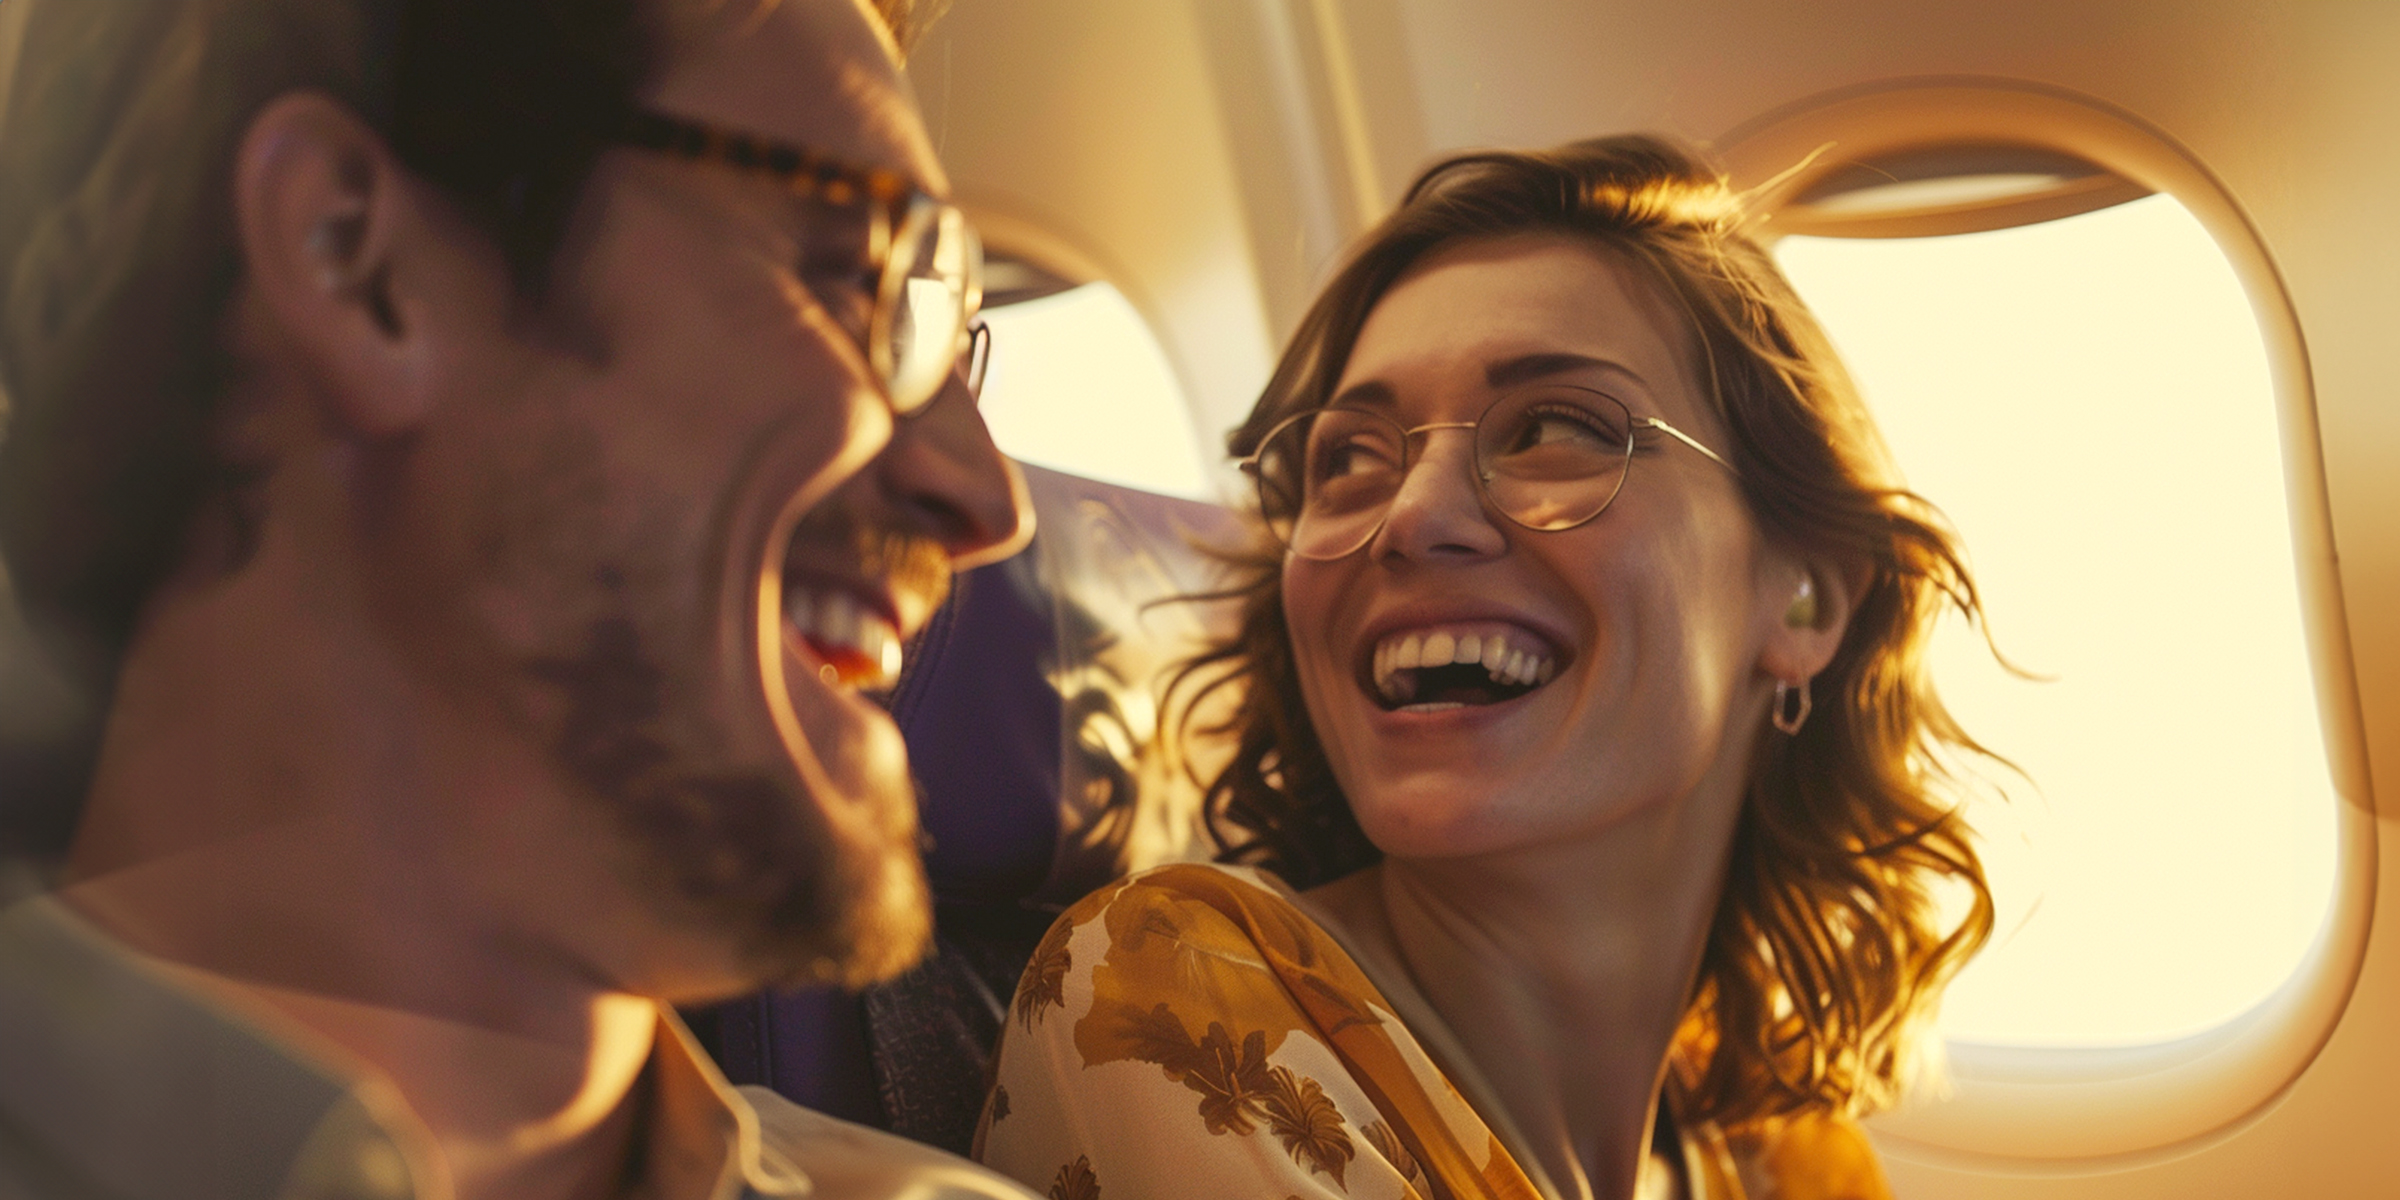 A couple smiling in an airplane | Source: AmoMama